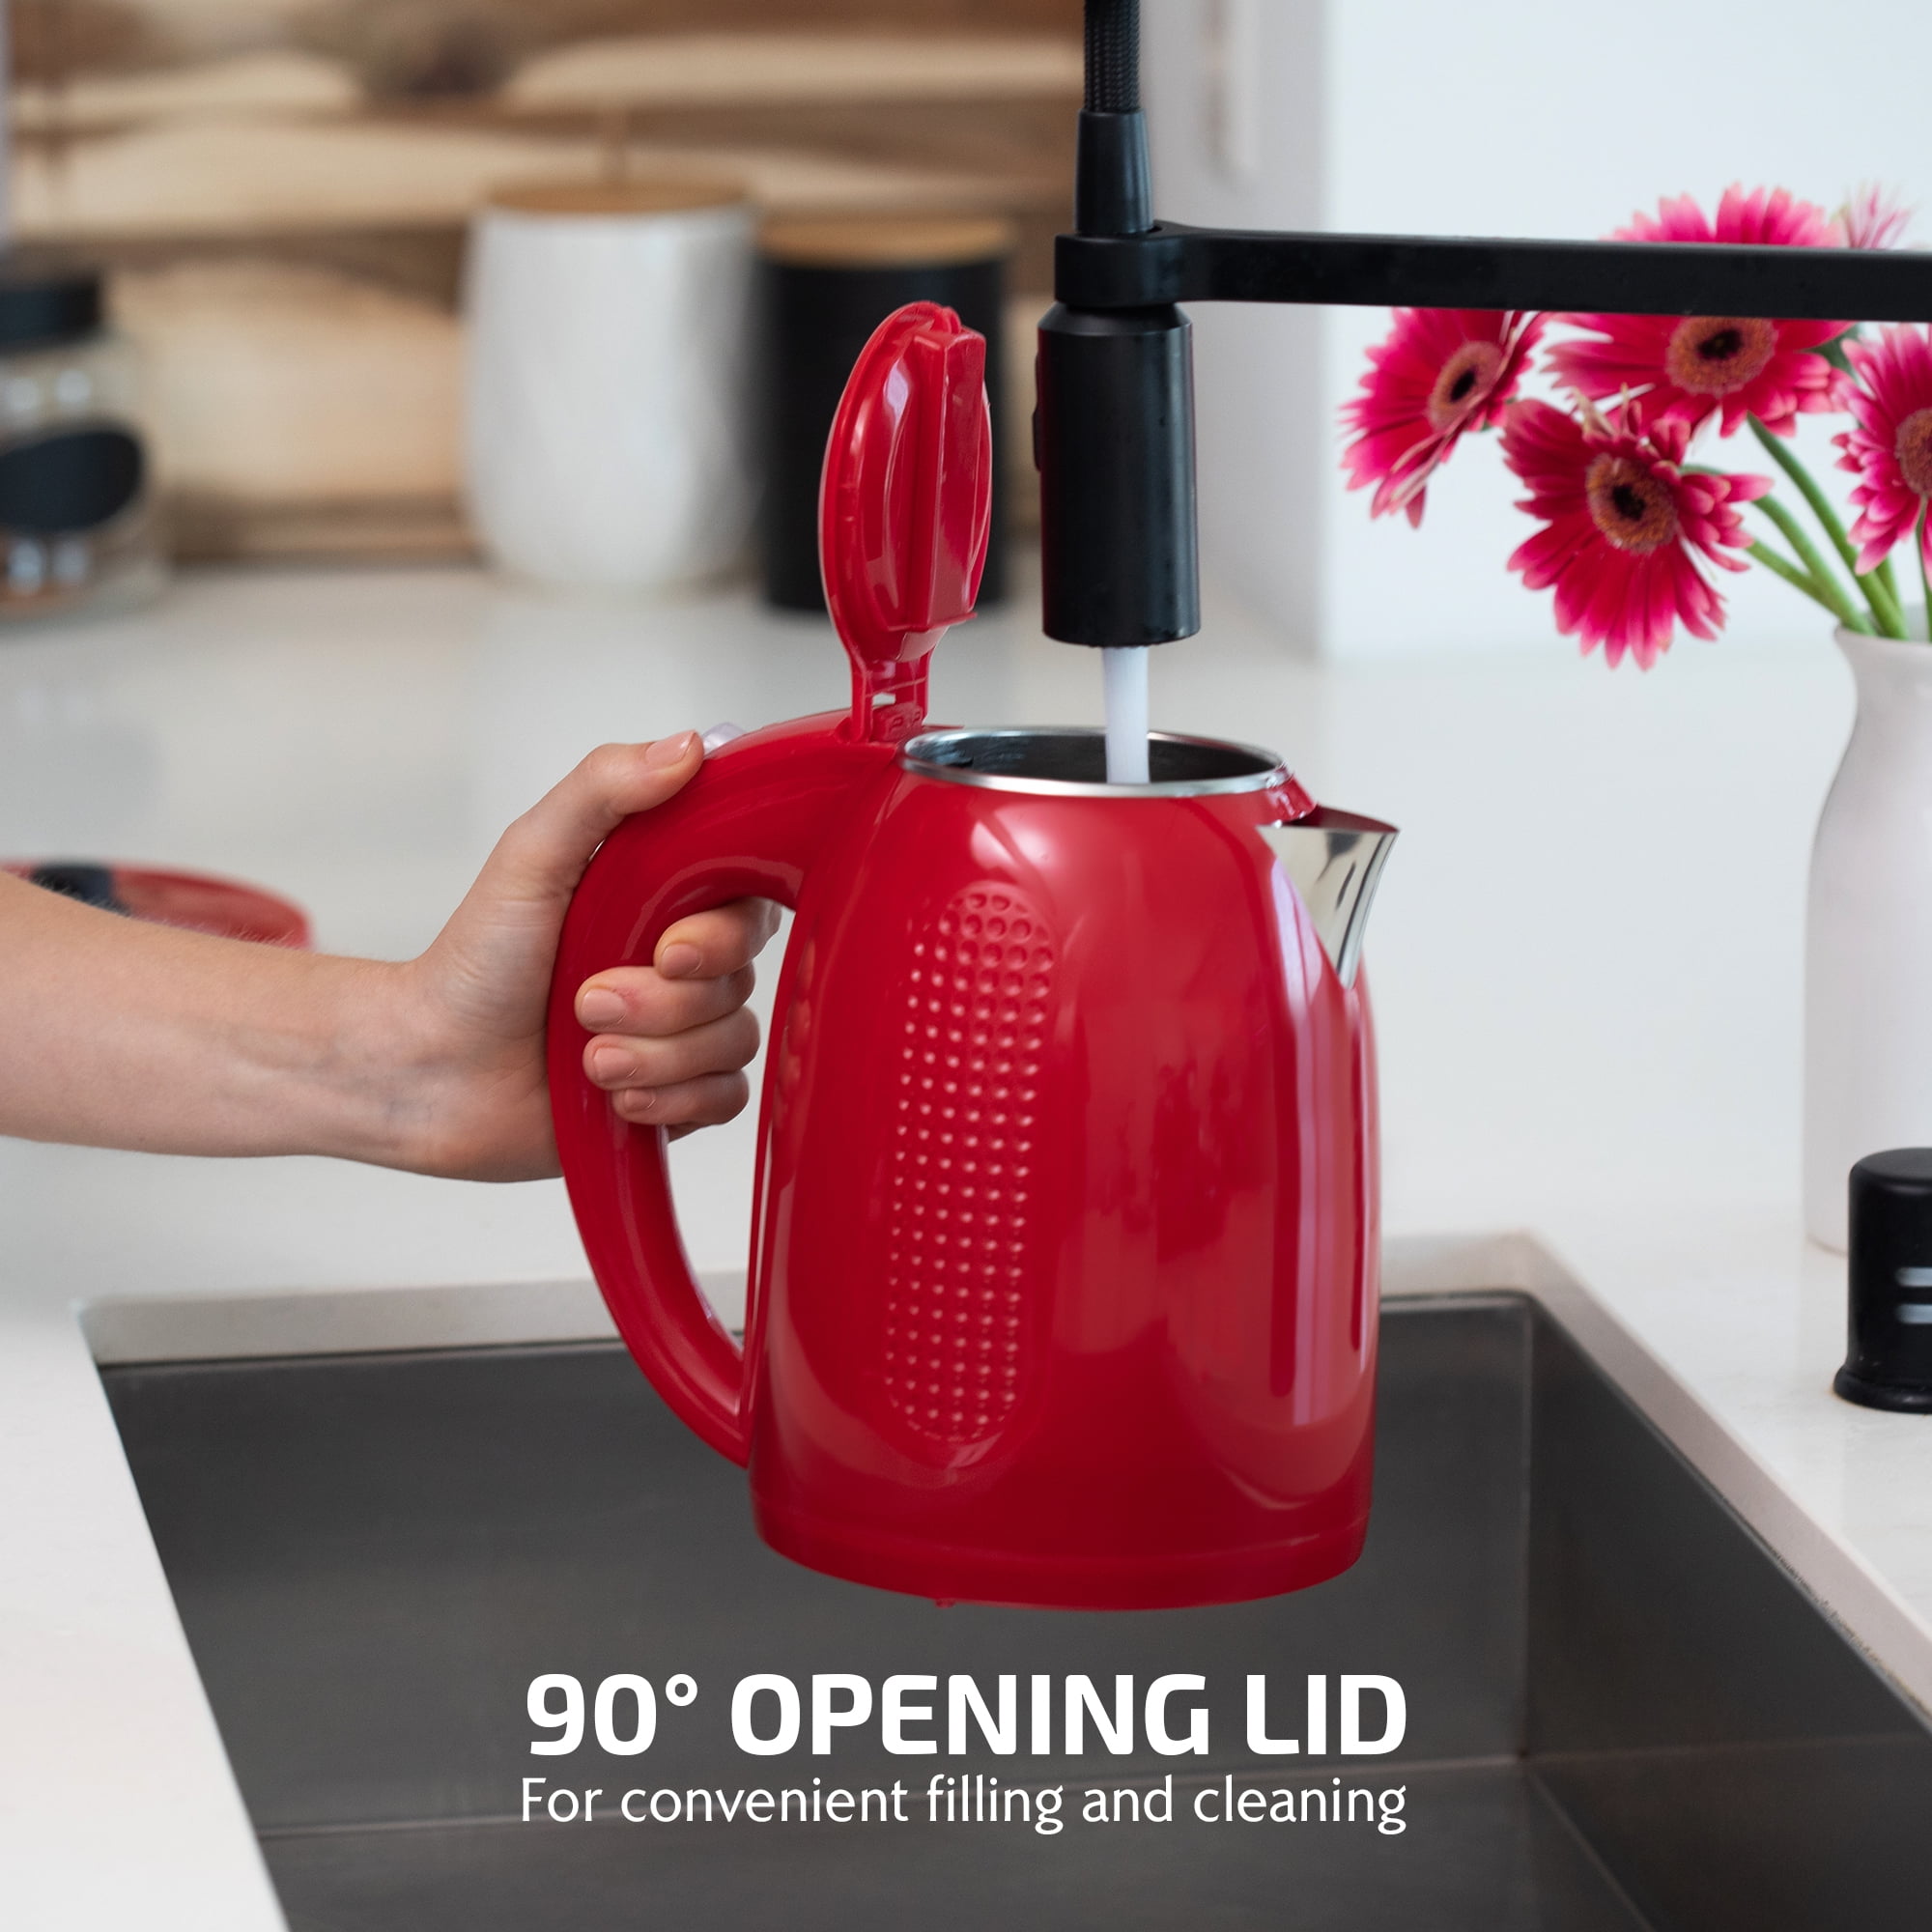 Ovente Electric Hot Water Kettle 1.7 Liter 1100 Watt Portable Red